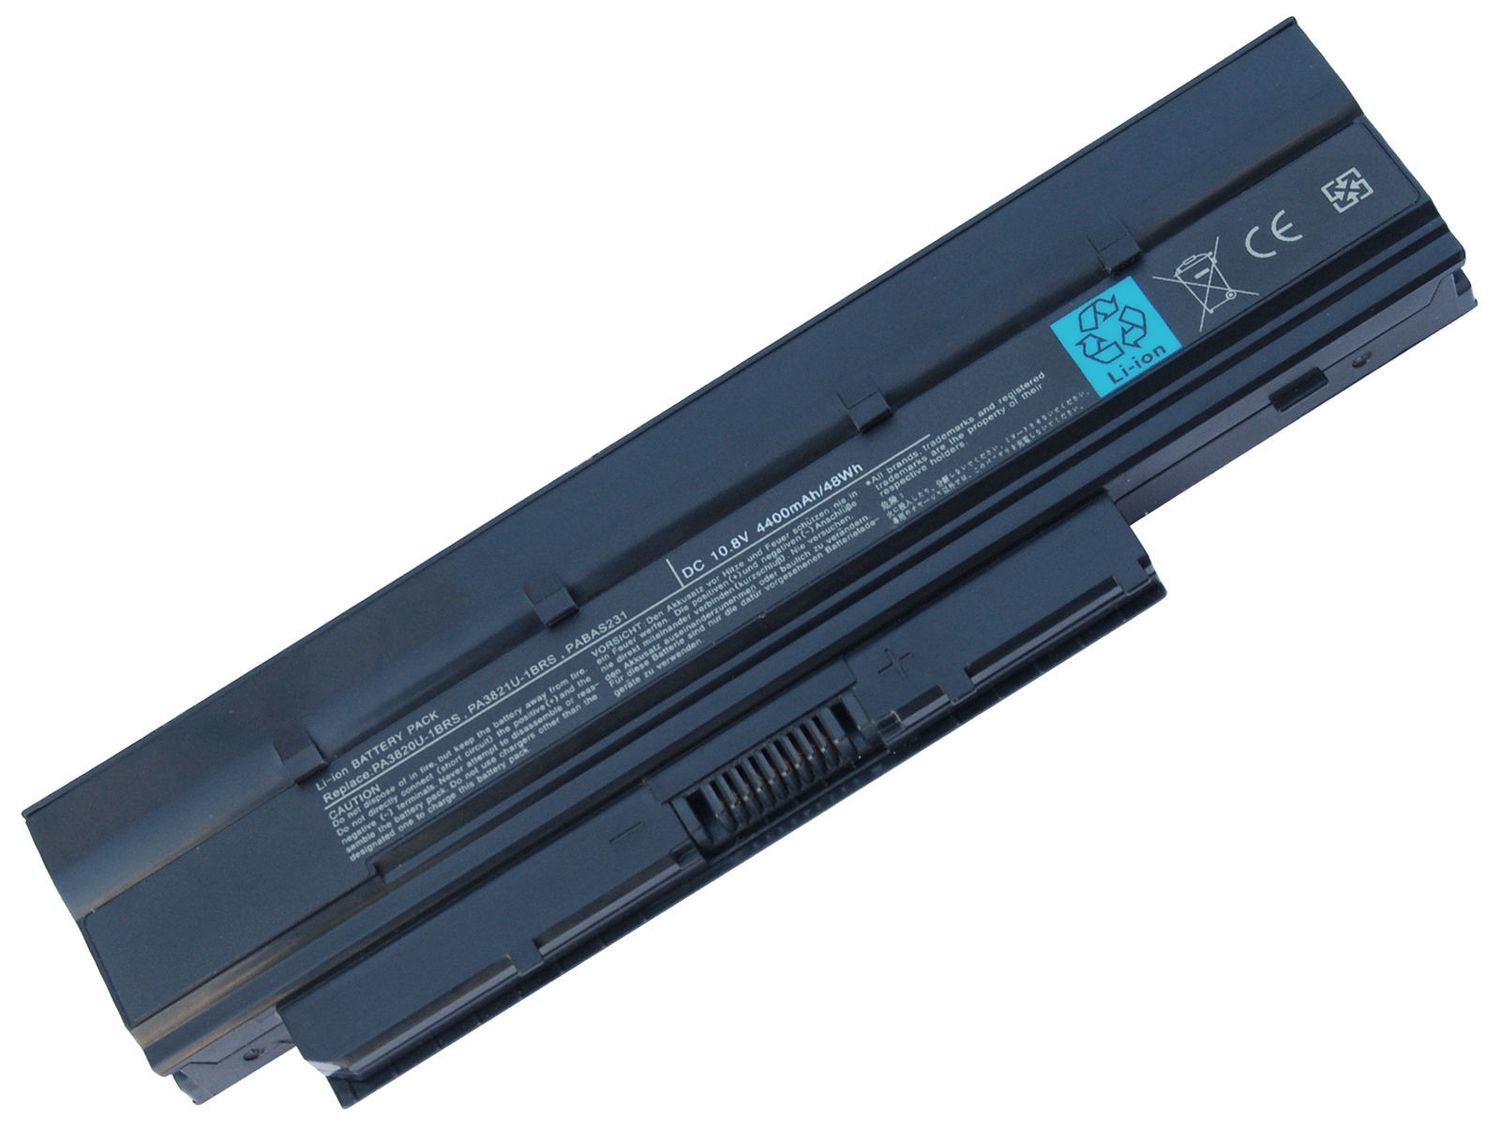 compatible for Toshiba dynabook mx series satellite T210 mini nb500 laptop battery